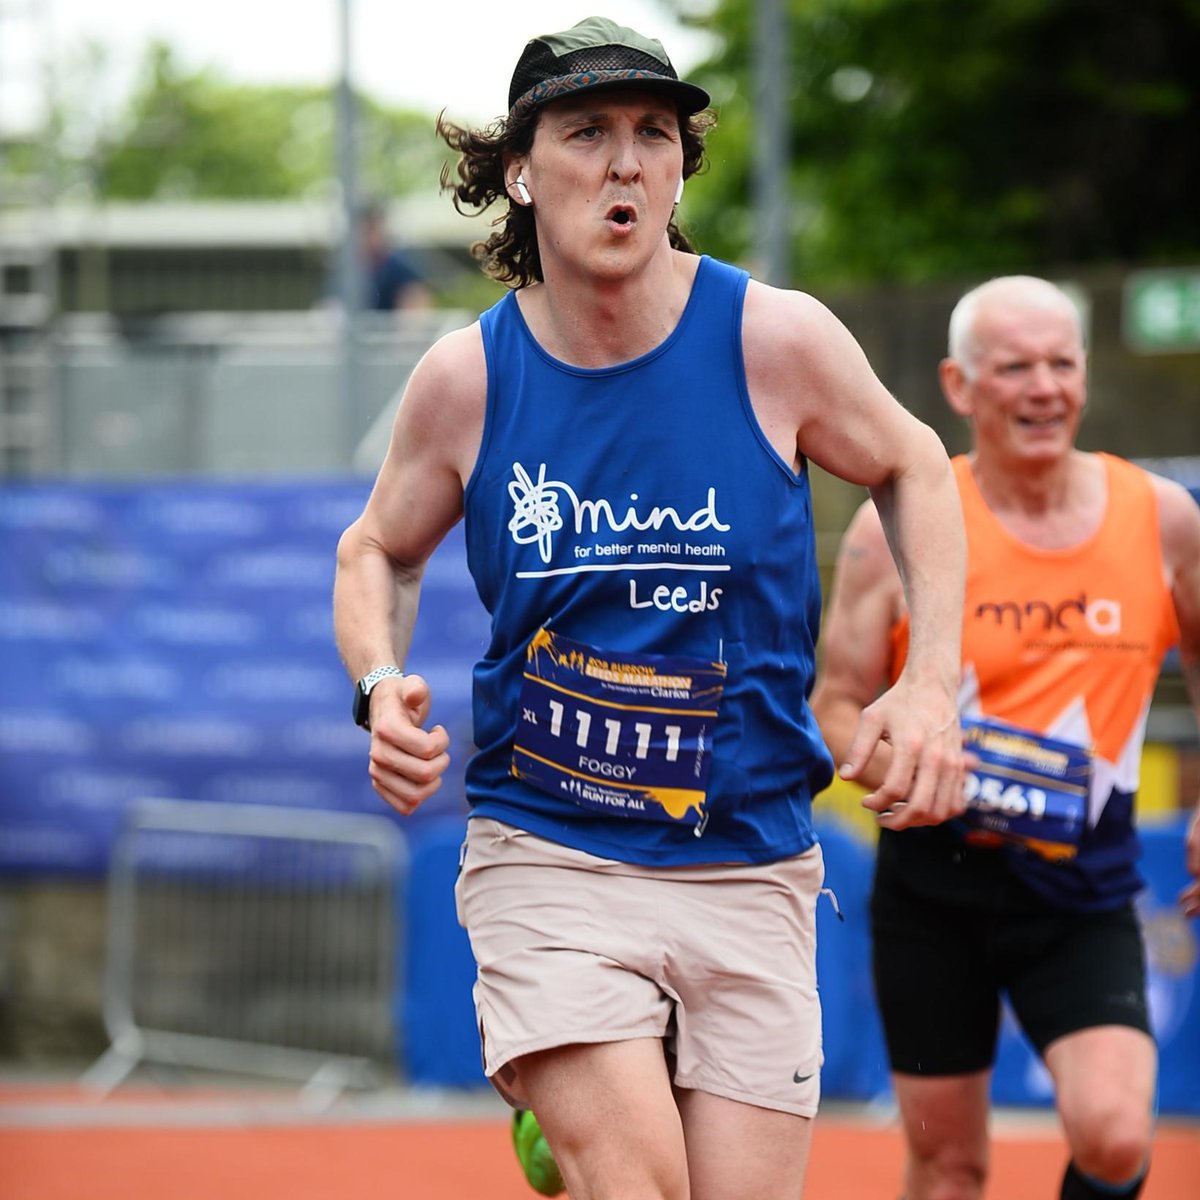 We've got places left for @runforall Leeds Marathon, Sunday 12th May & Leeds 10K, Sunday 23rd June! Visit our website today to make sure you don't miss out on the friendliest runs in the country! lght.ly/i64b96o